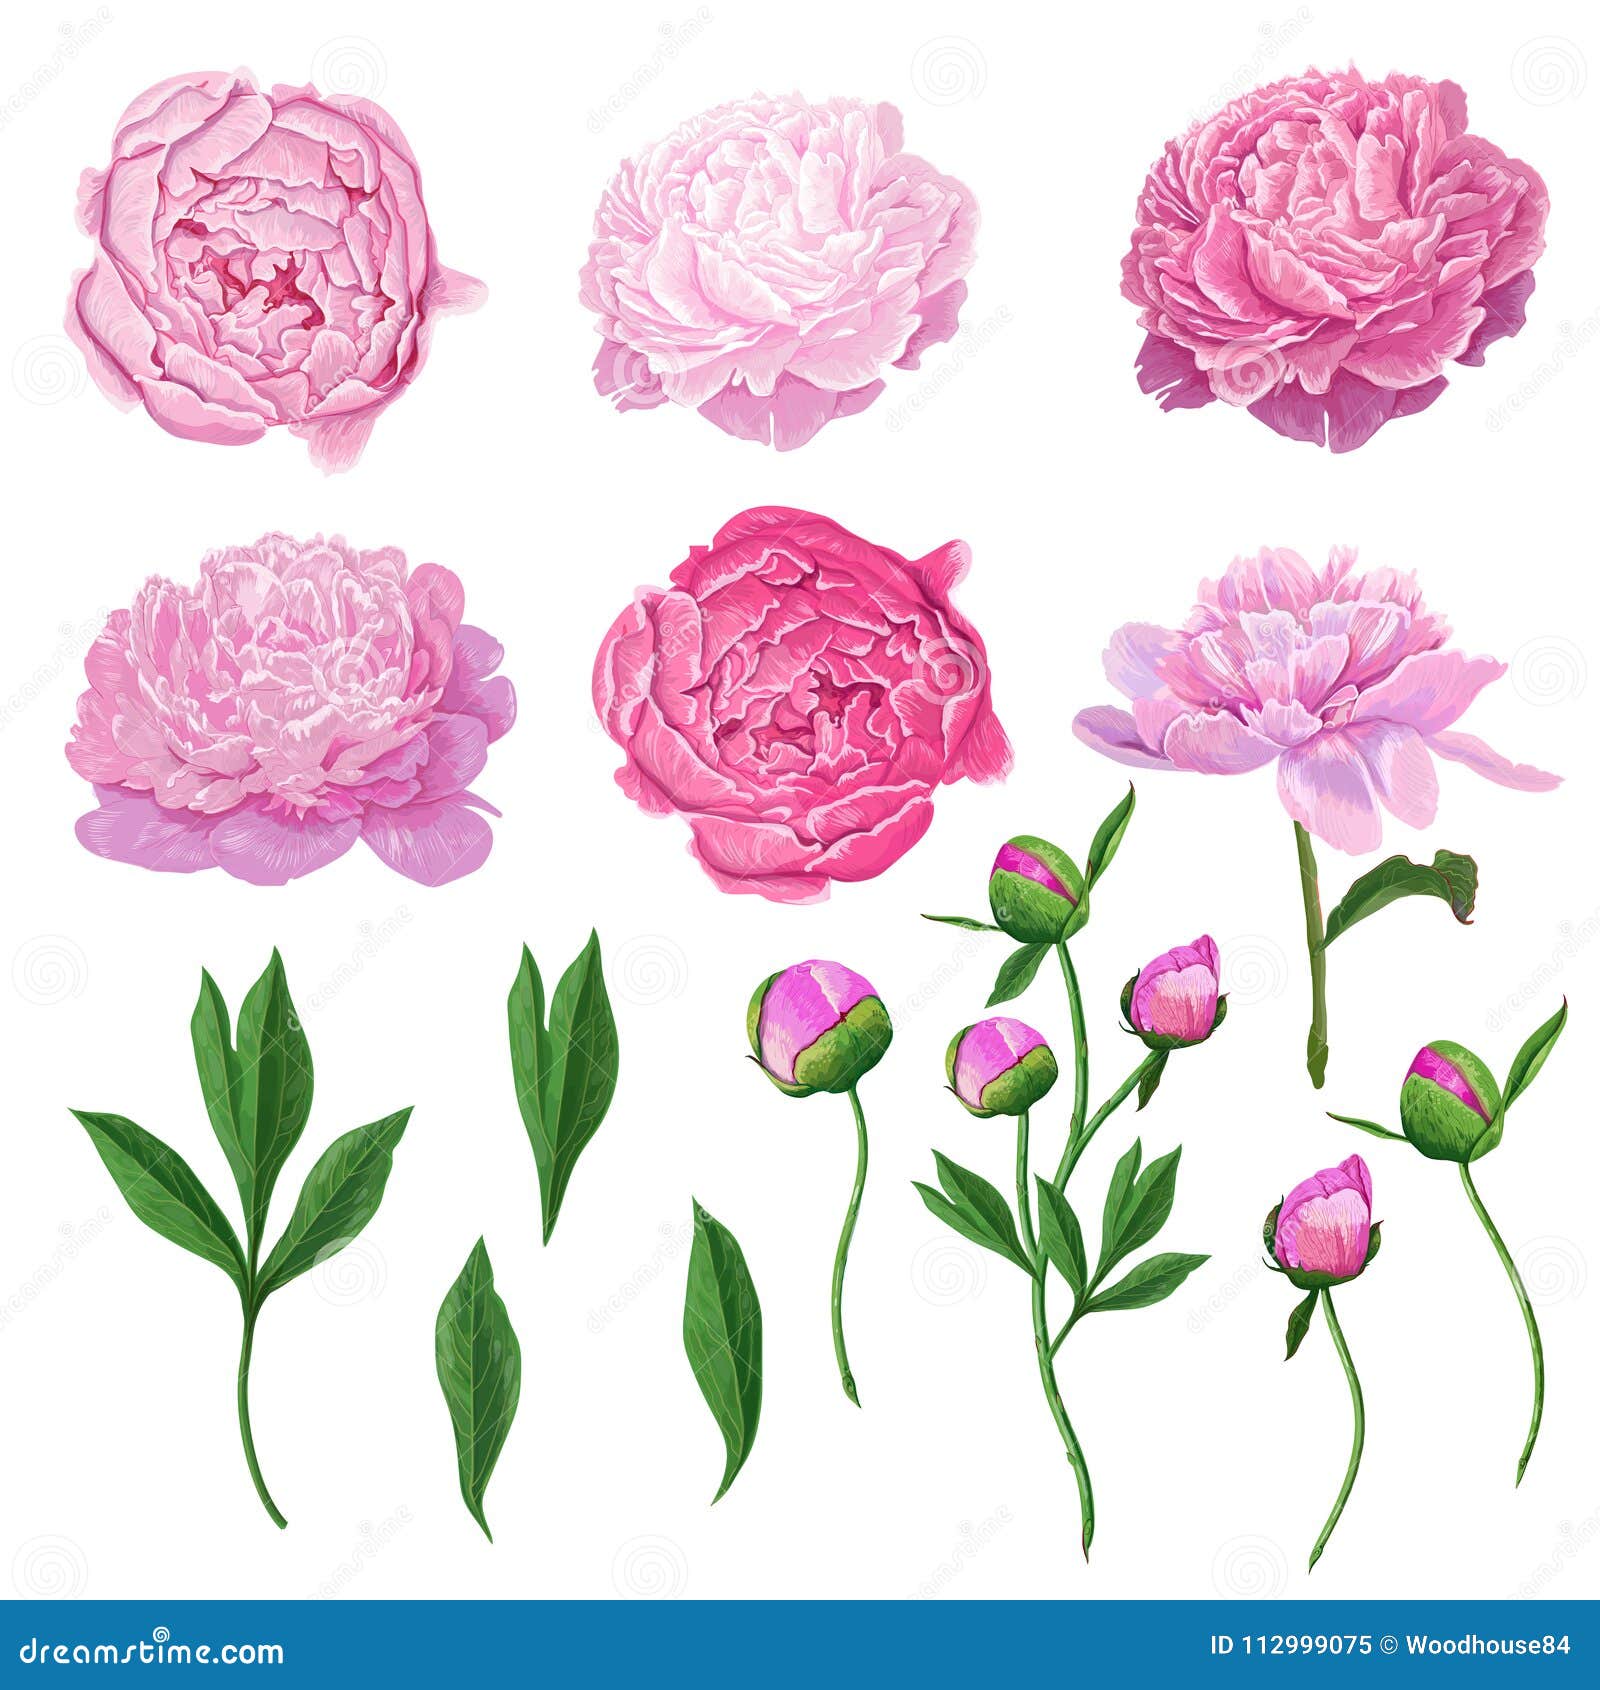 floral s set with pink peony flowers, leaves and buds. hand drawn botanical flora for decoration, wedding